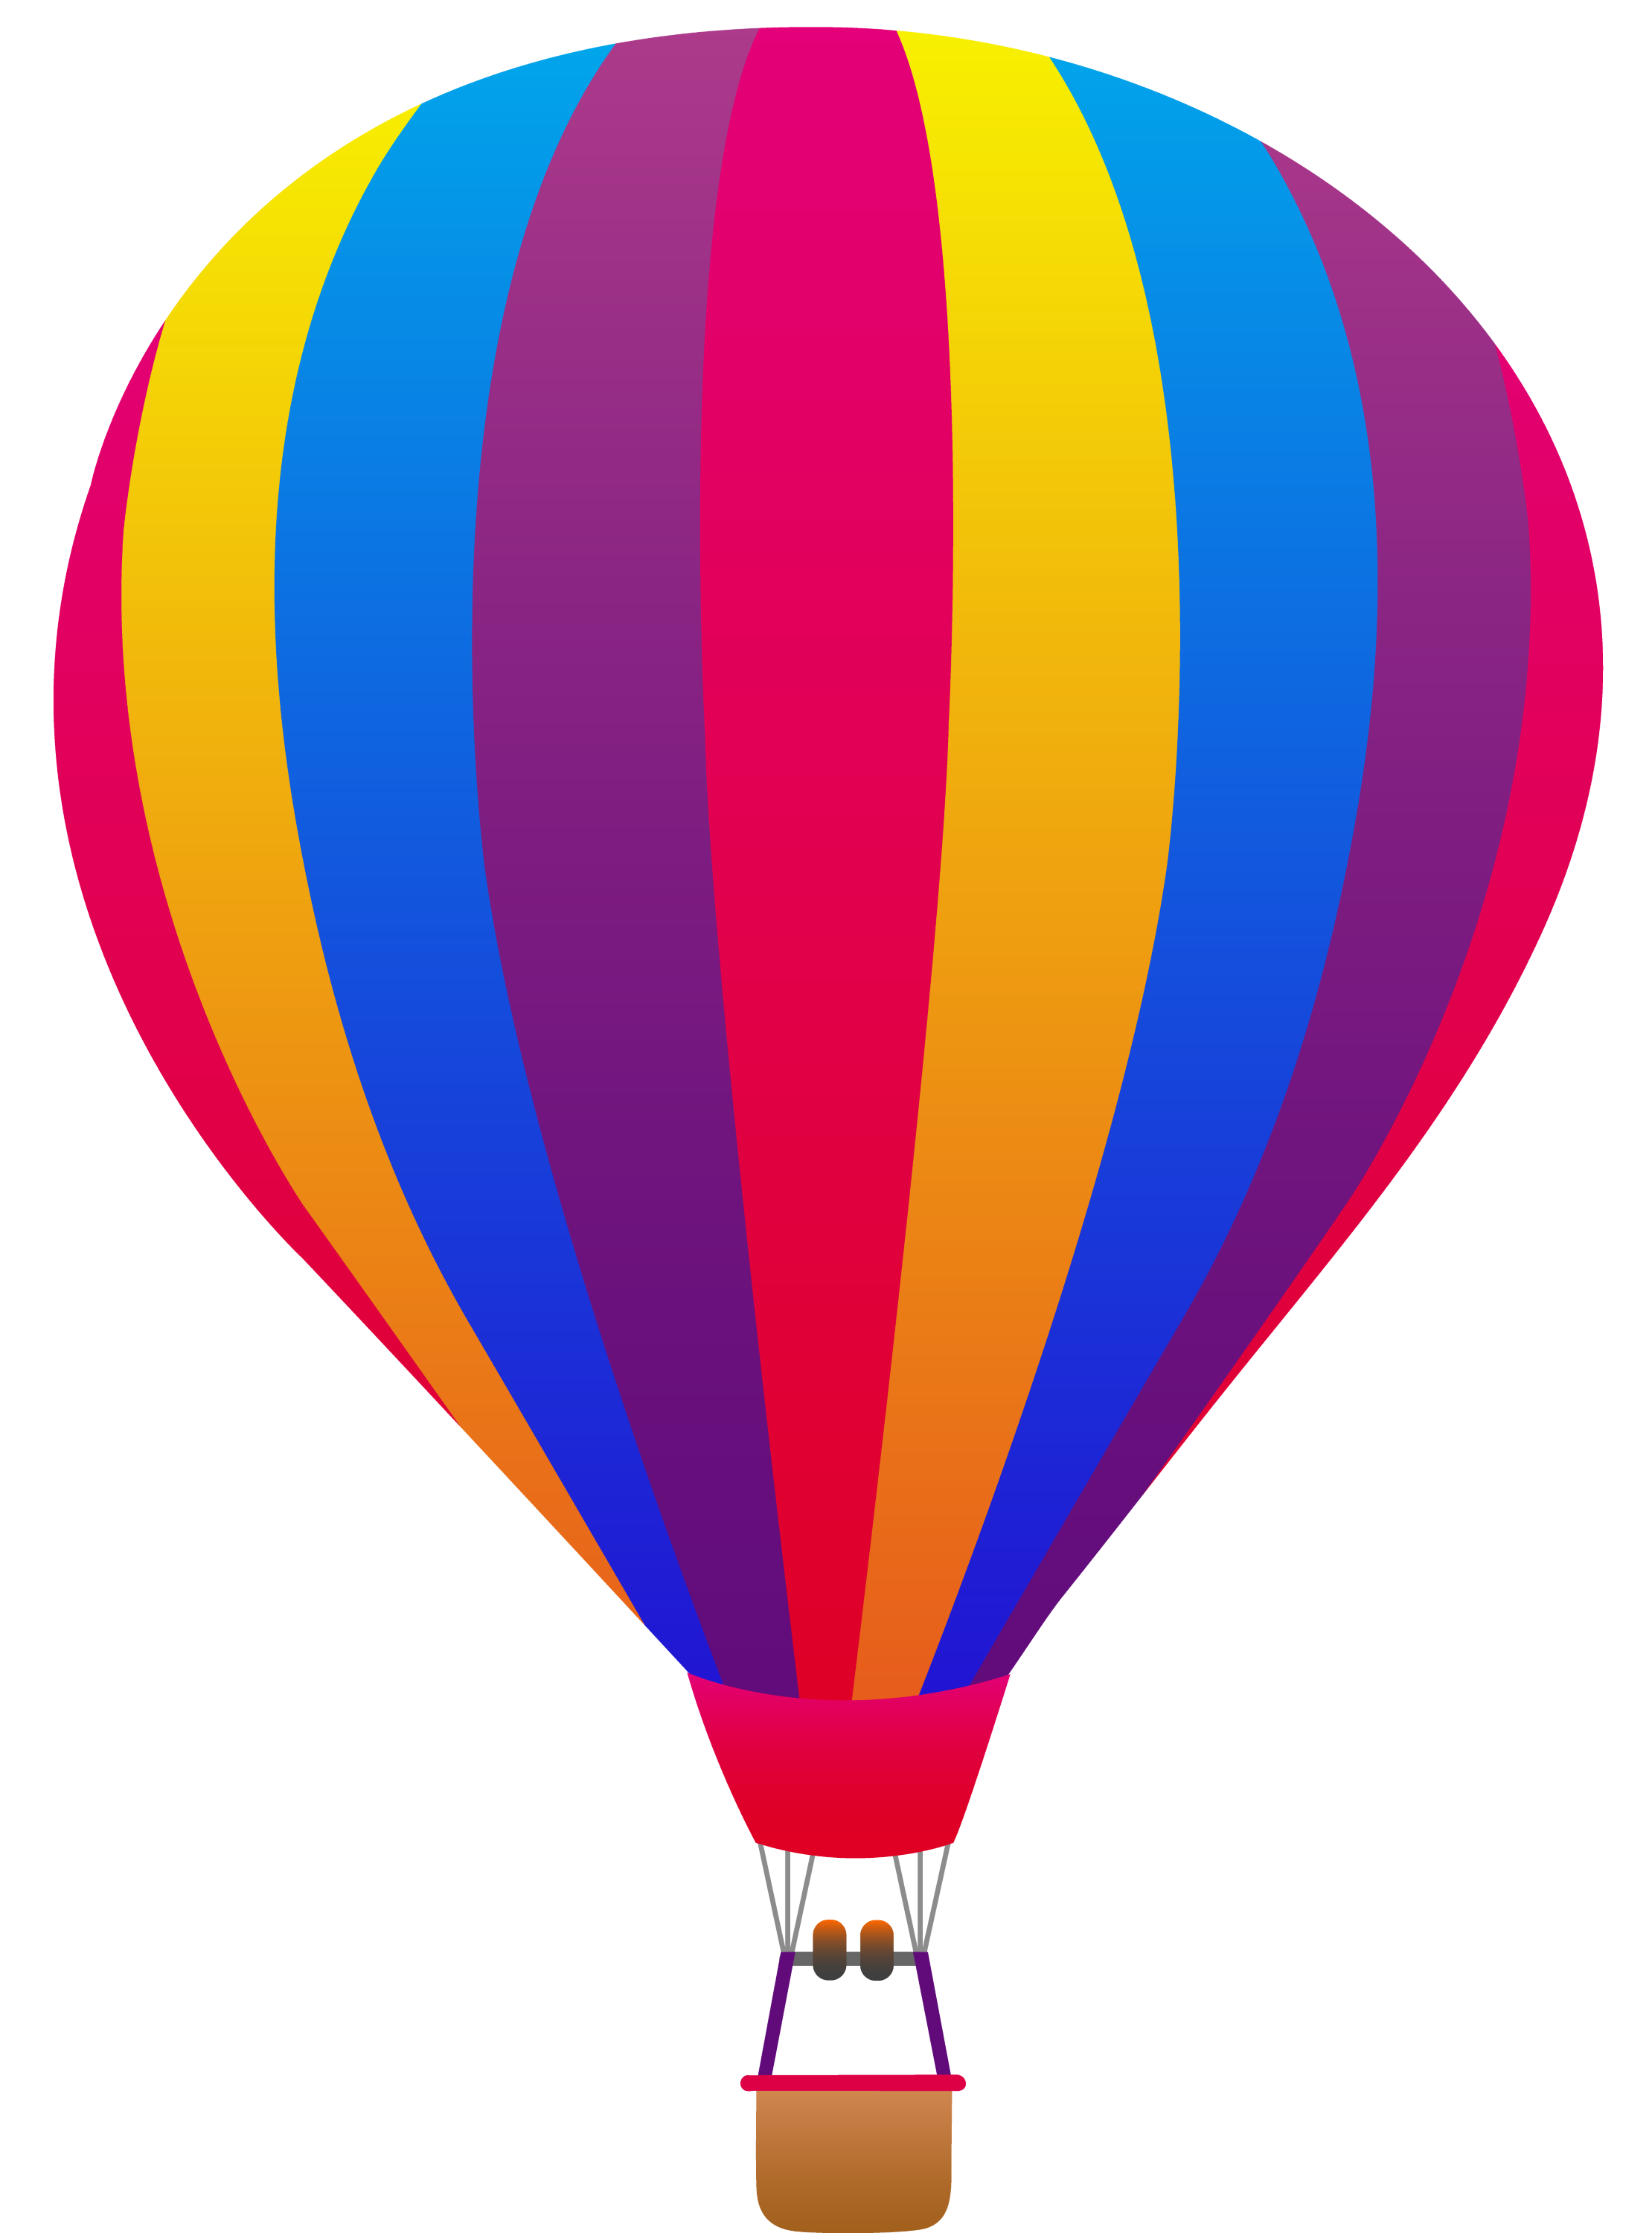 free clipart images hot air balloon - photo #22